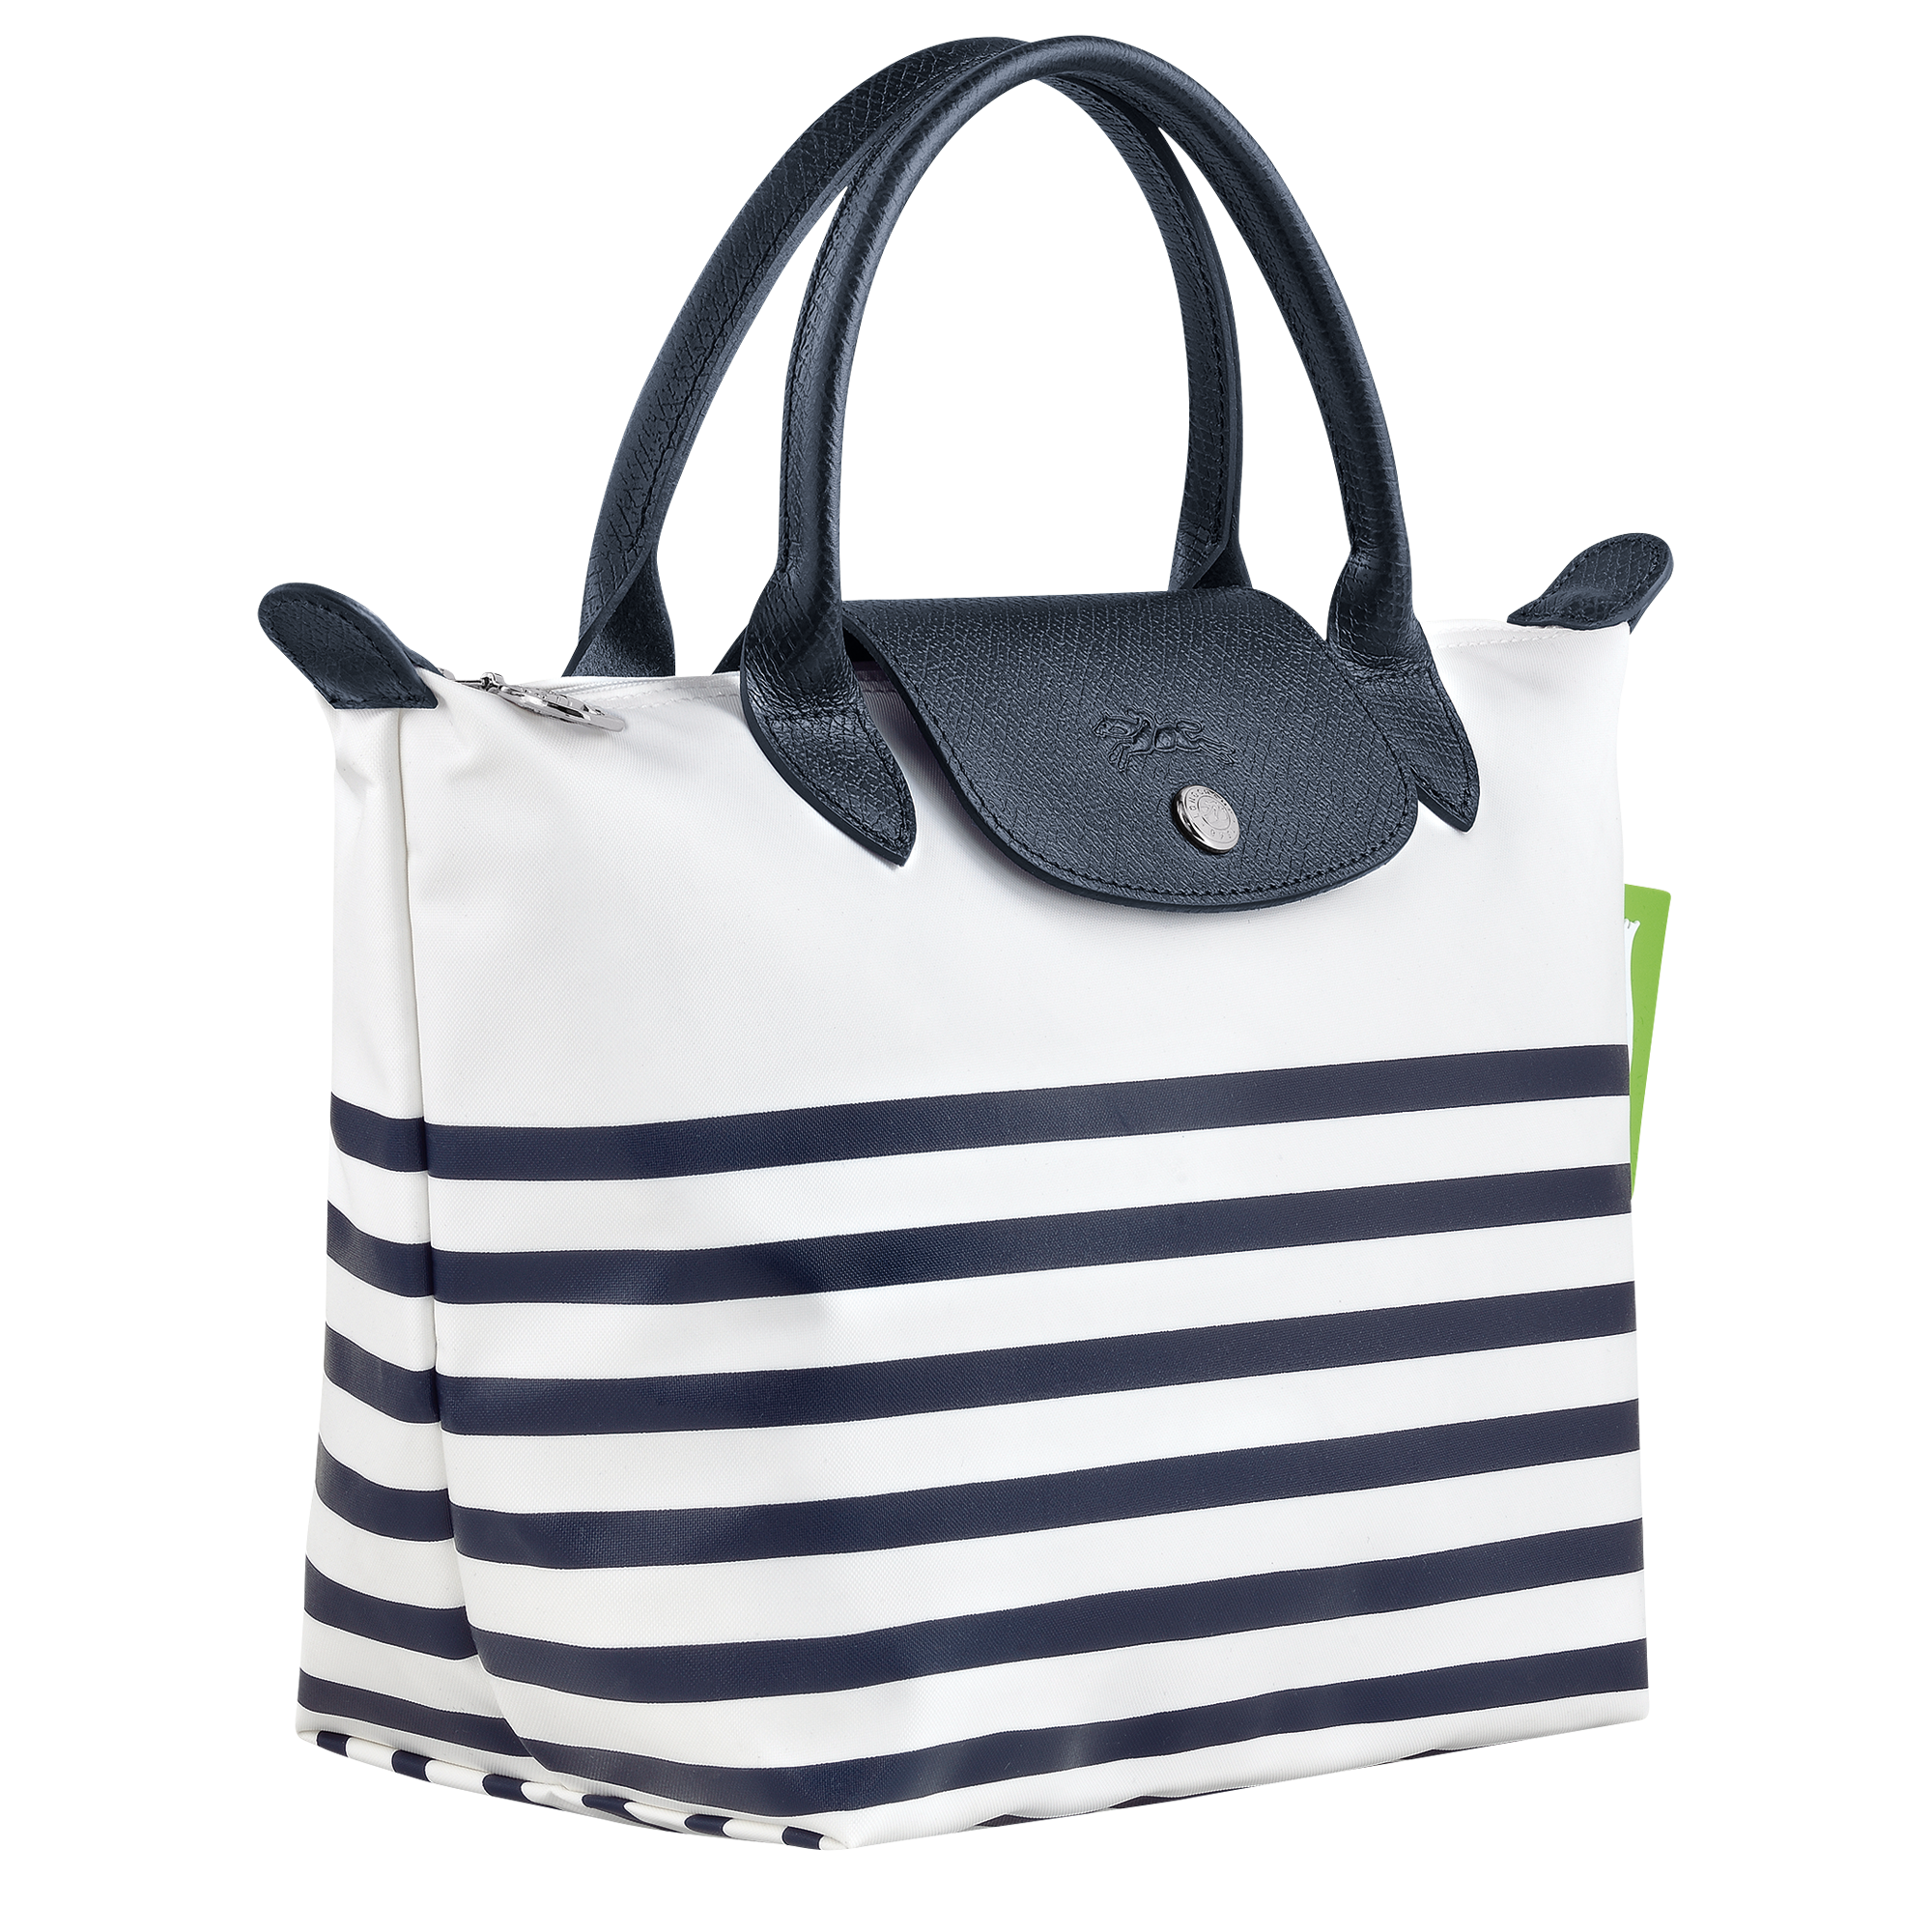 Le Pliage Collection Handtasche S, Marine/Weiss